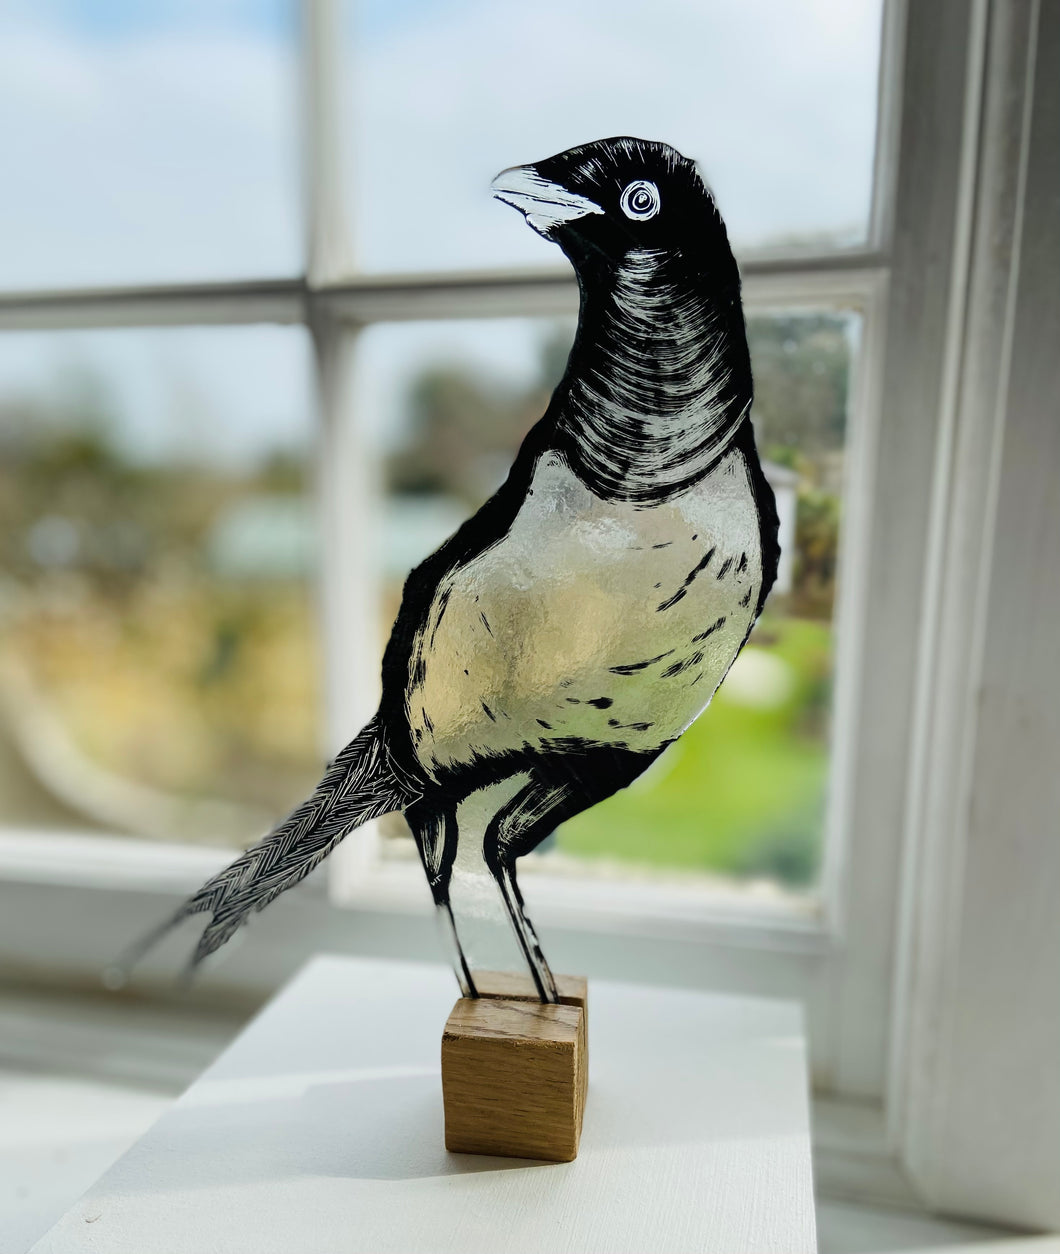 Painted, Cut Out Glass Bird